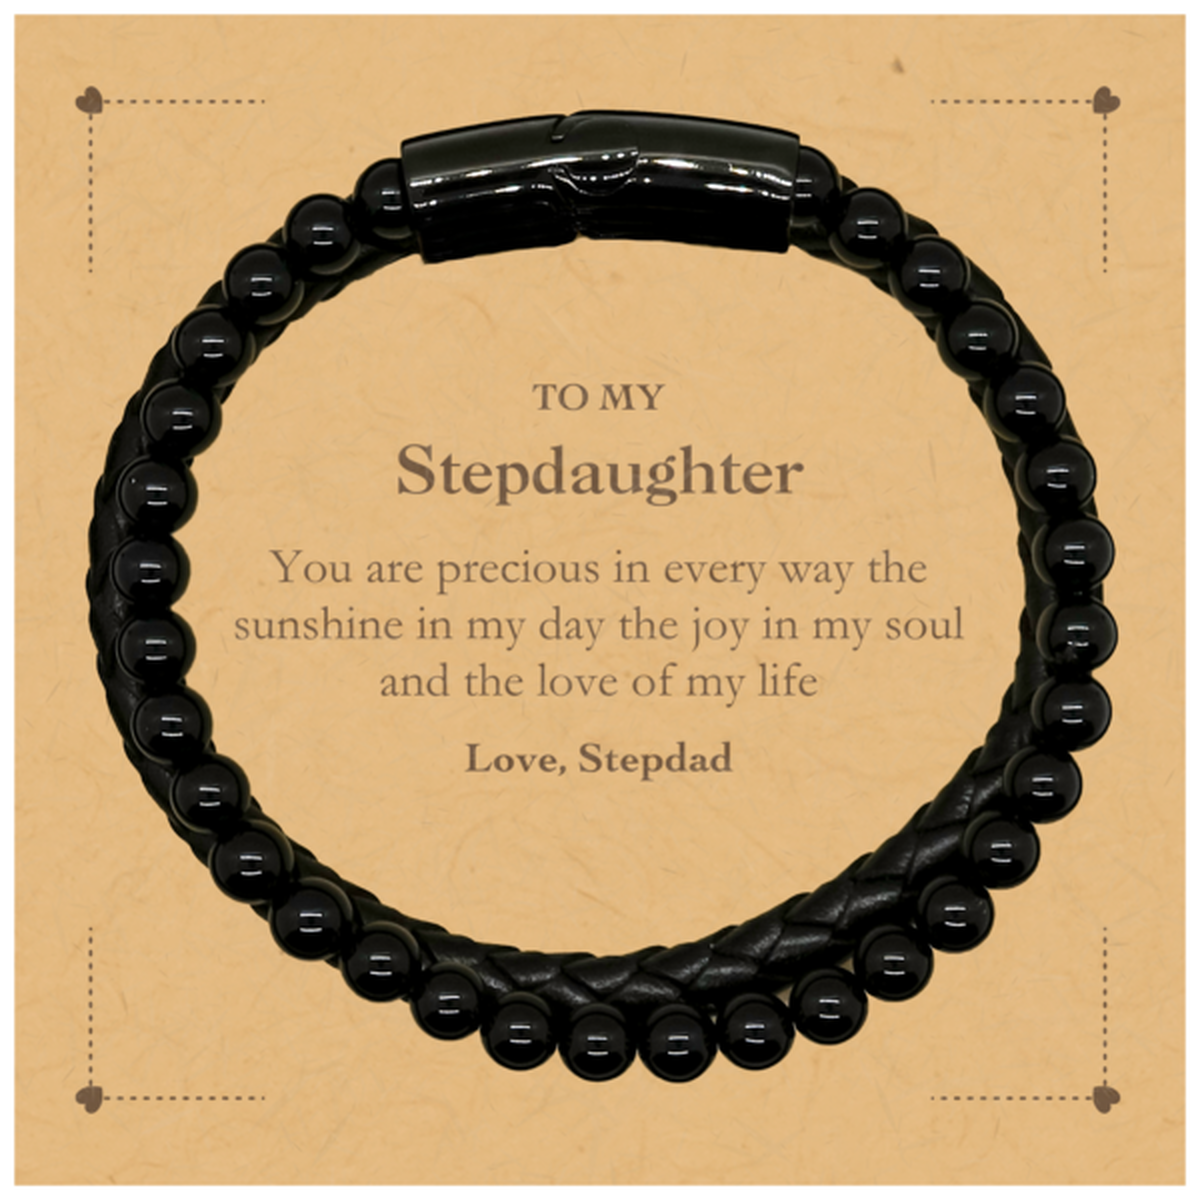 Graduation Gifts for Stepdaughter Stone Leather Bracelets Present from Stepdad, Christmas Stepdaughter Birthday Gifts Stepdaughter You are precious in every way the sunshine in my day. Love, Stepdad